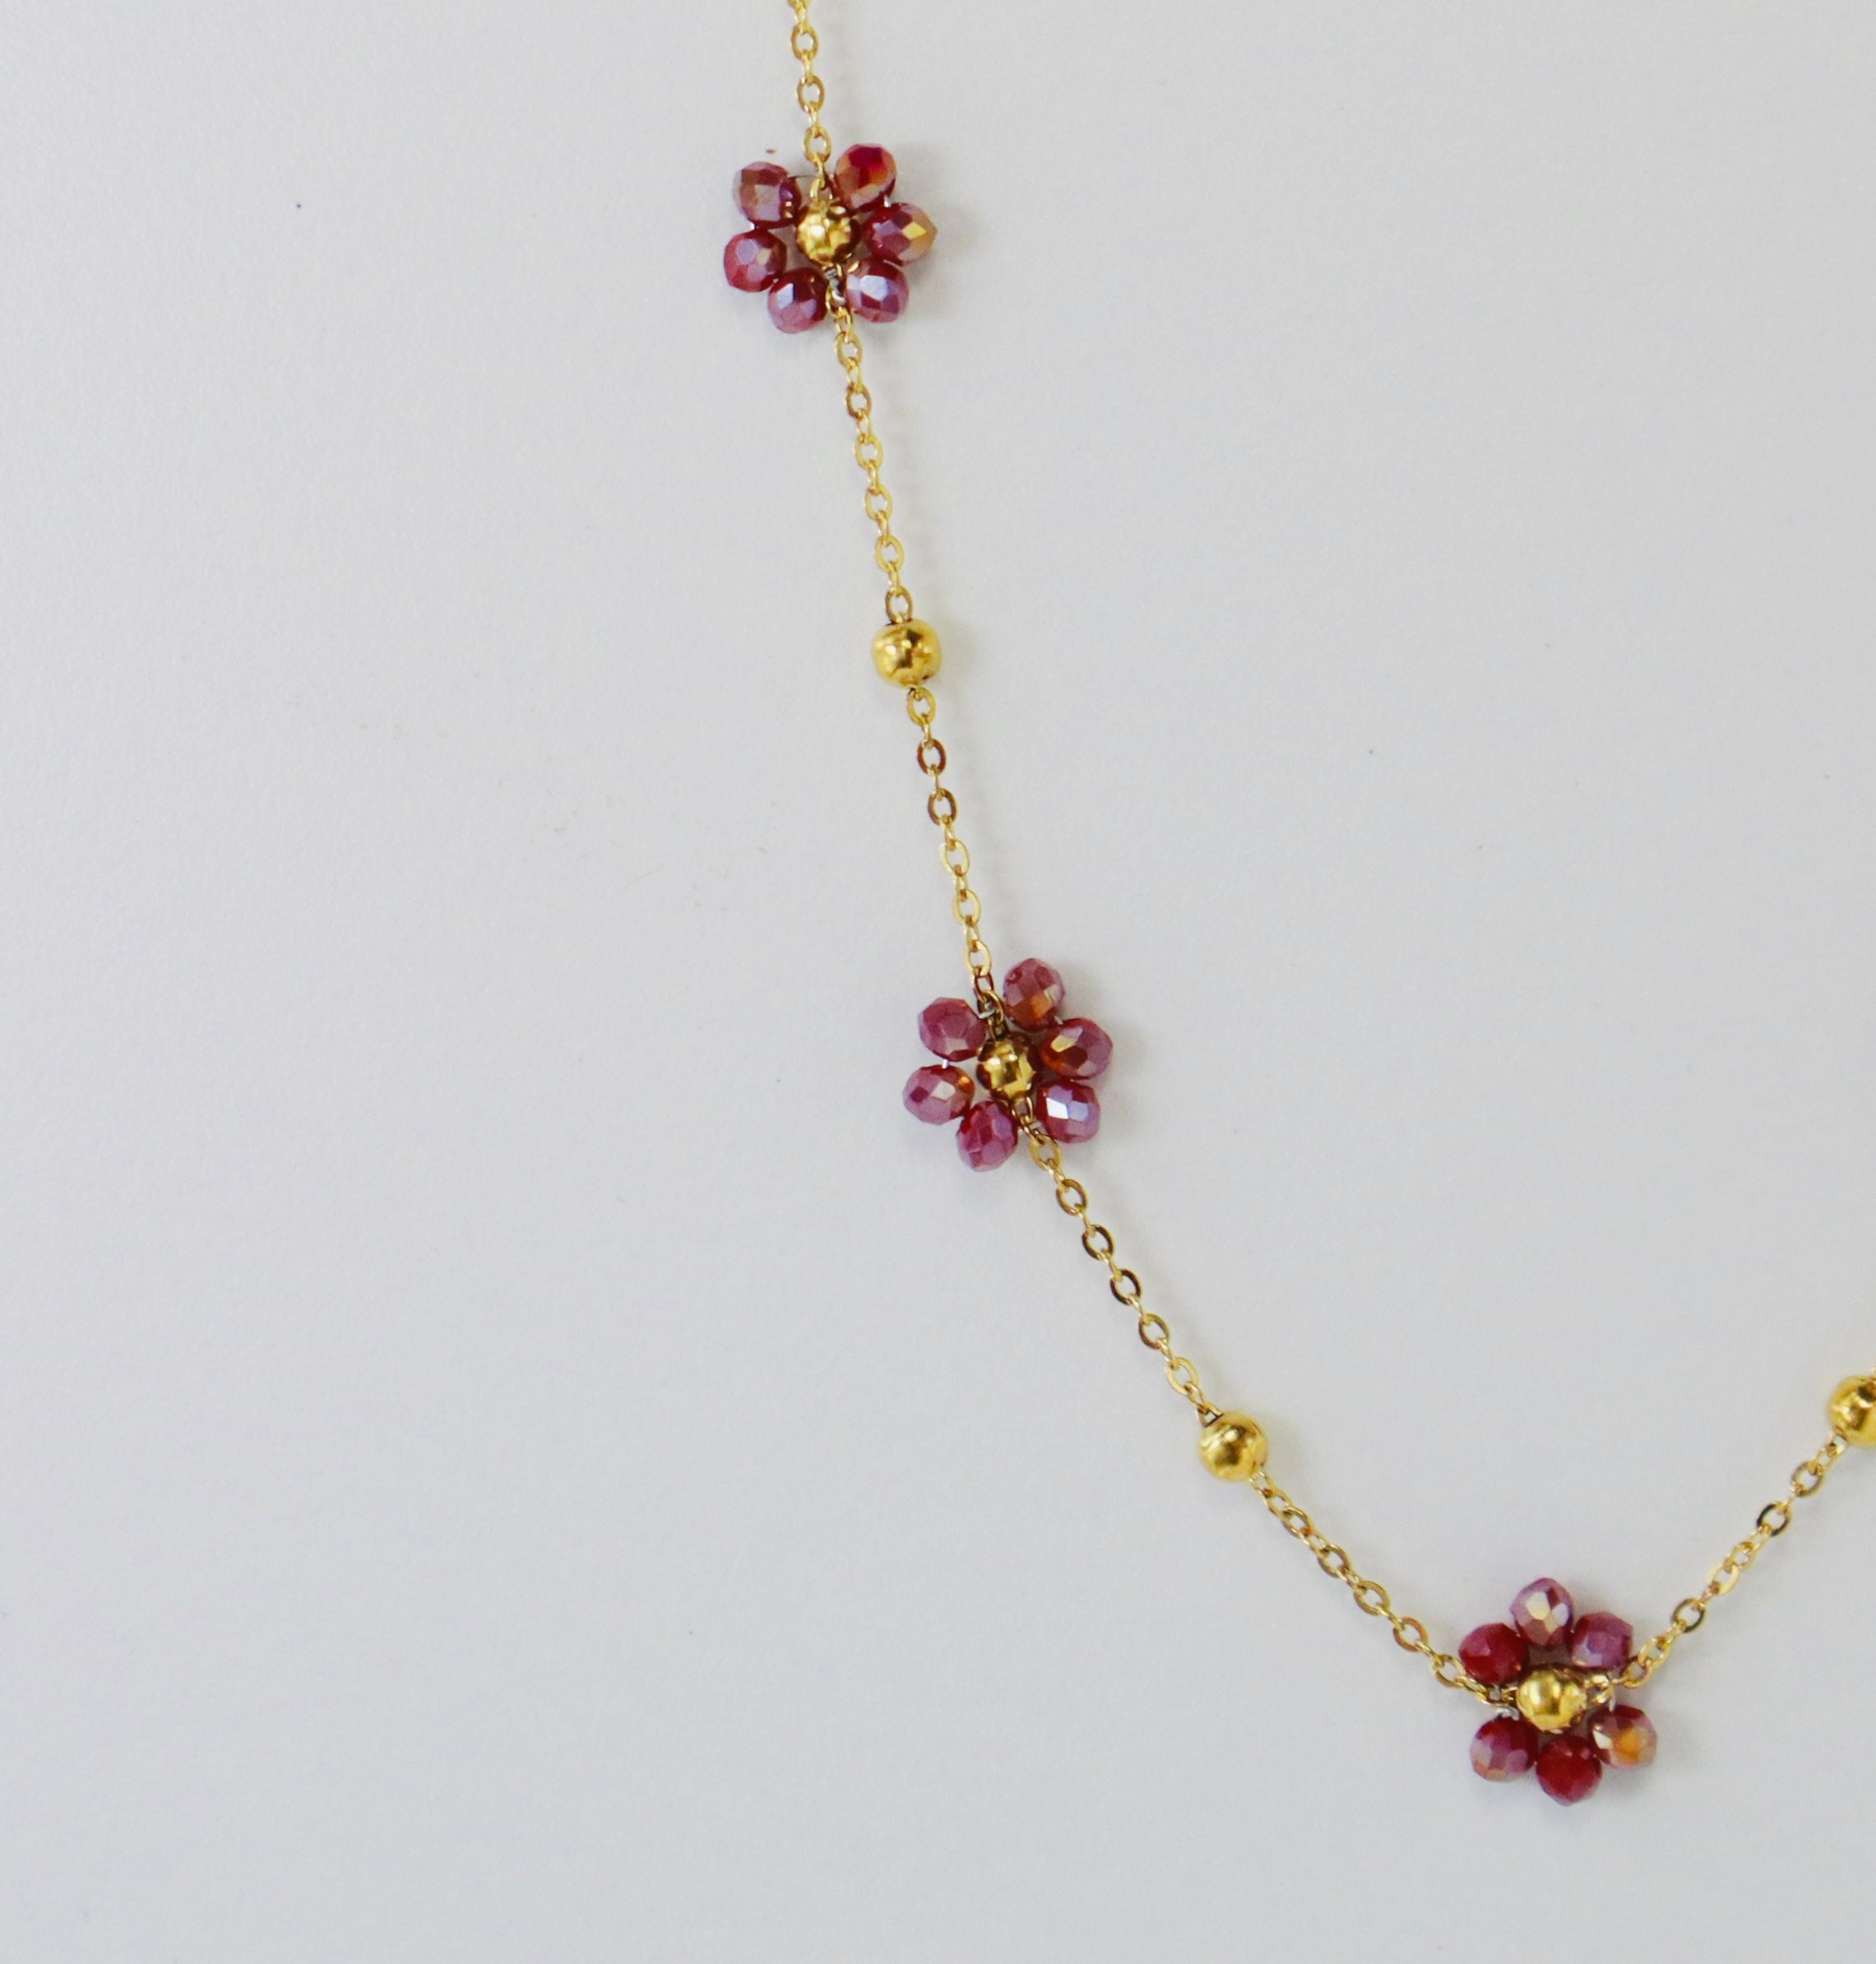 Red & Gold Crystal Daisy Flower Necklace